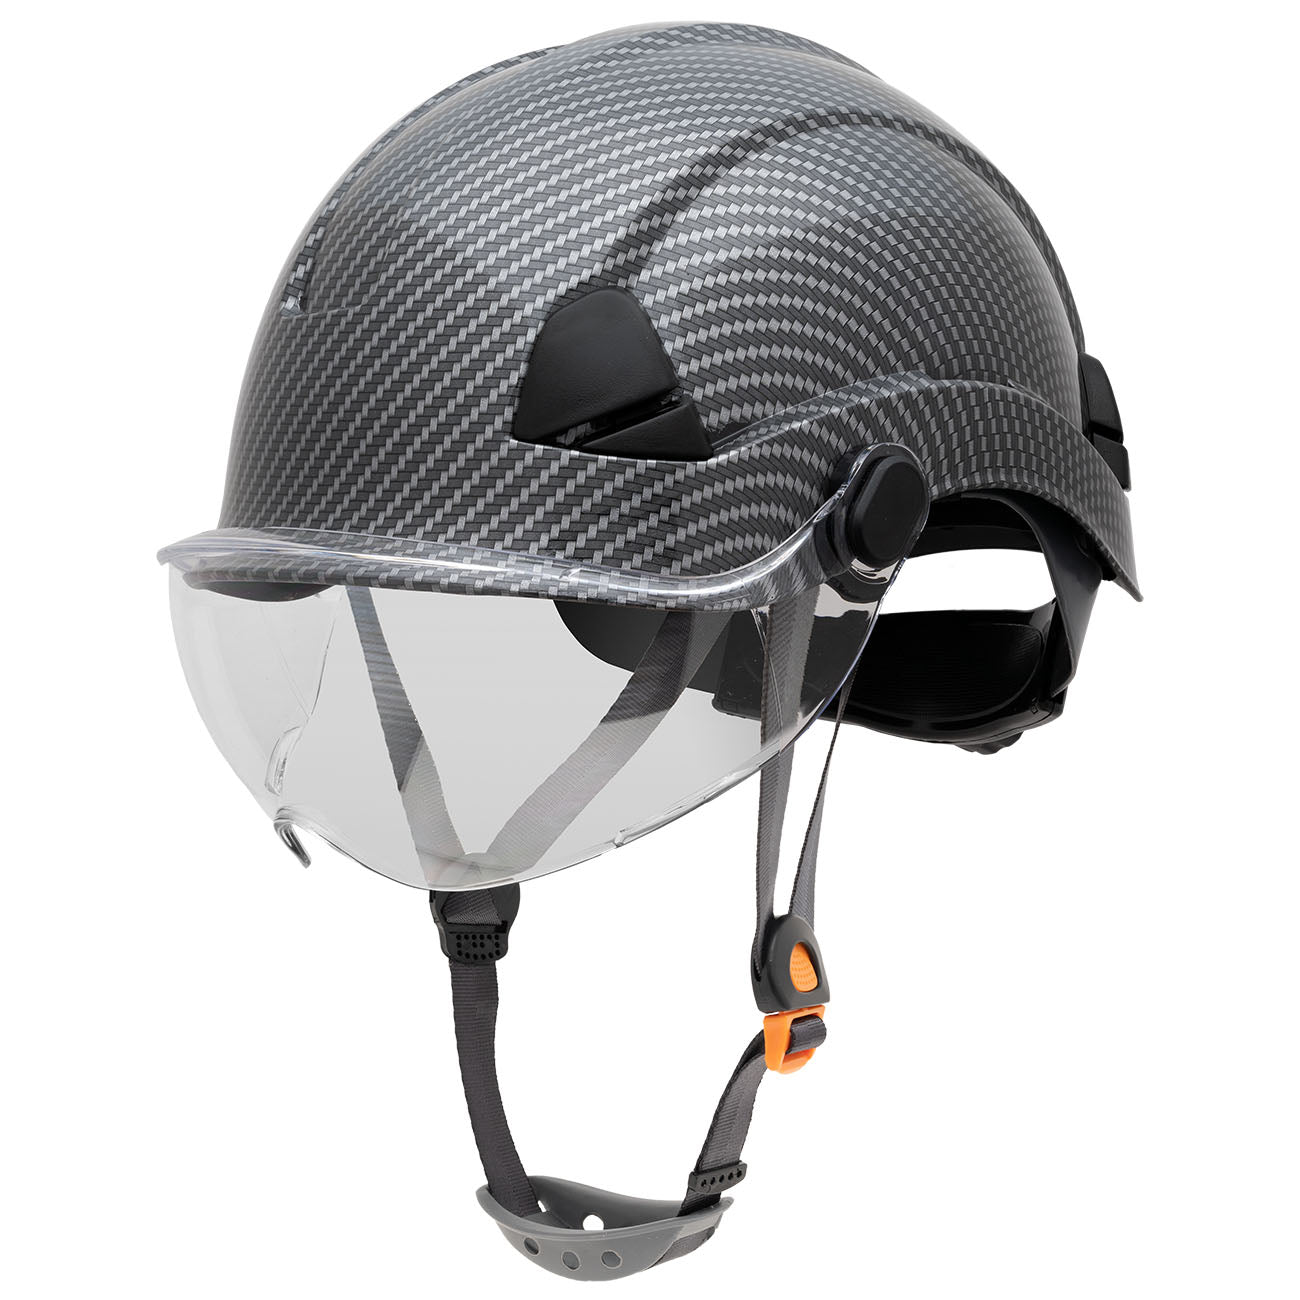 Honeywell Fibre Metal Safety Helmet Non-Vented Hydrographic